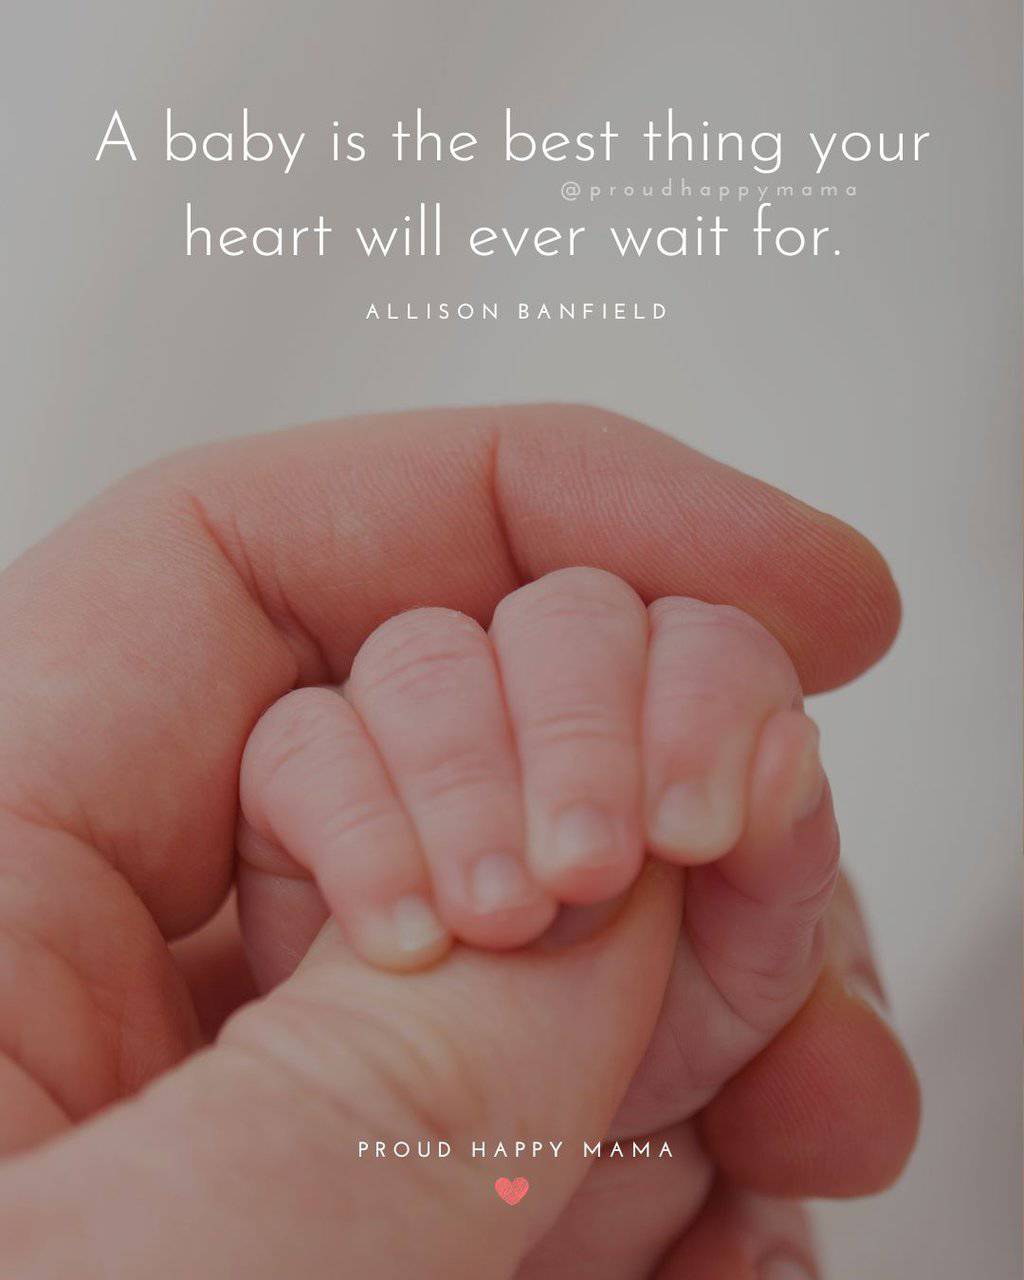 baby quote - A baby is the best thing your heart will ever wait for.